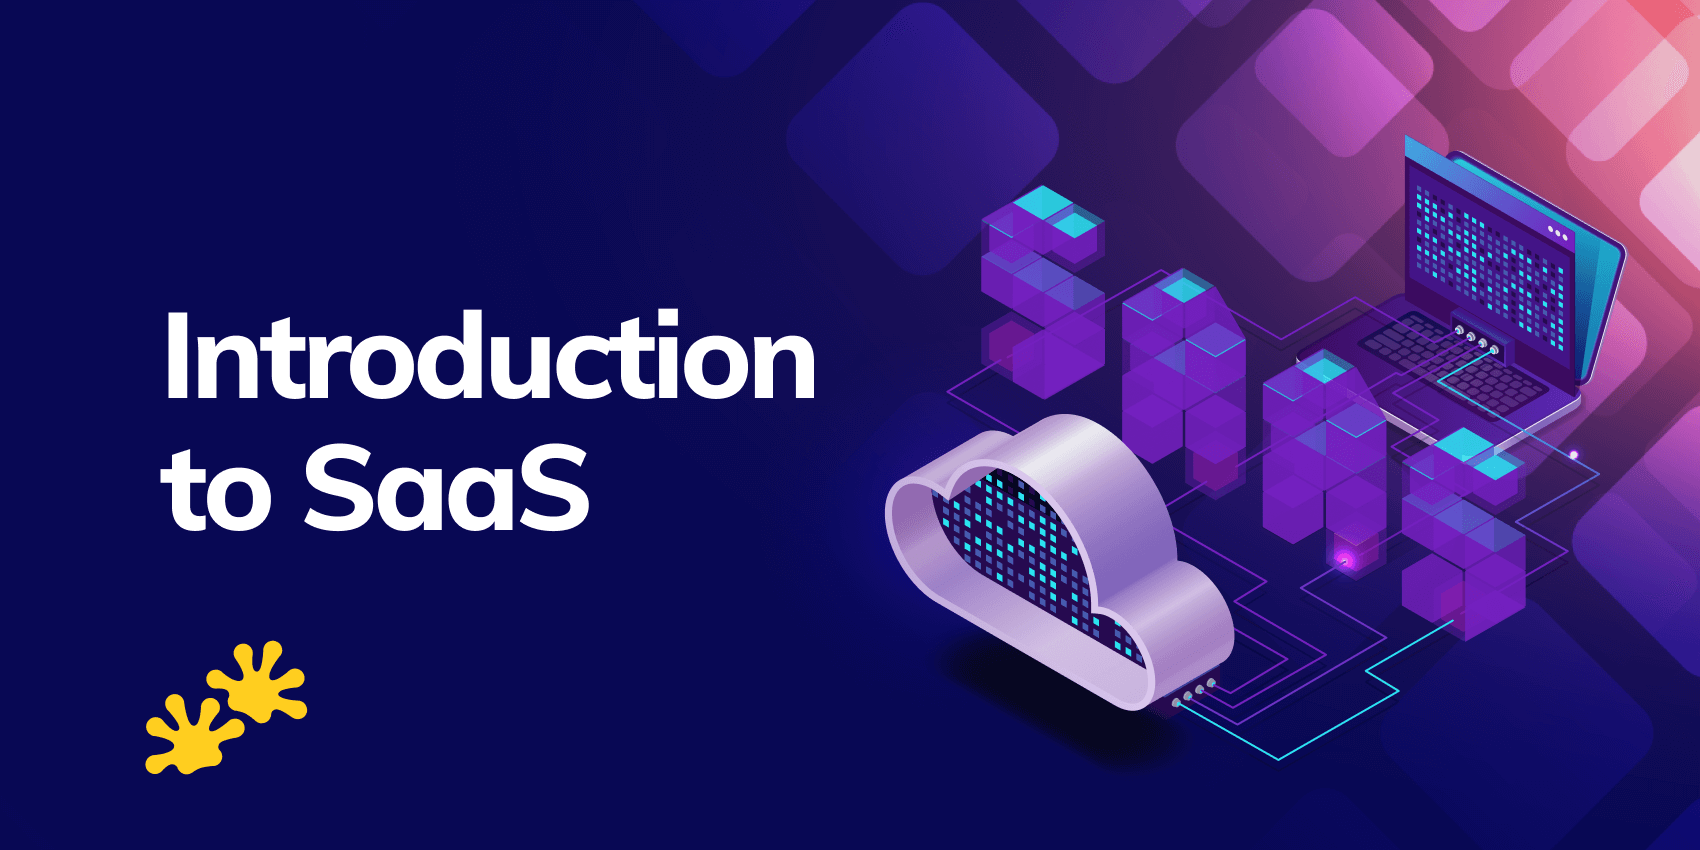 Introduction to SaaS